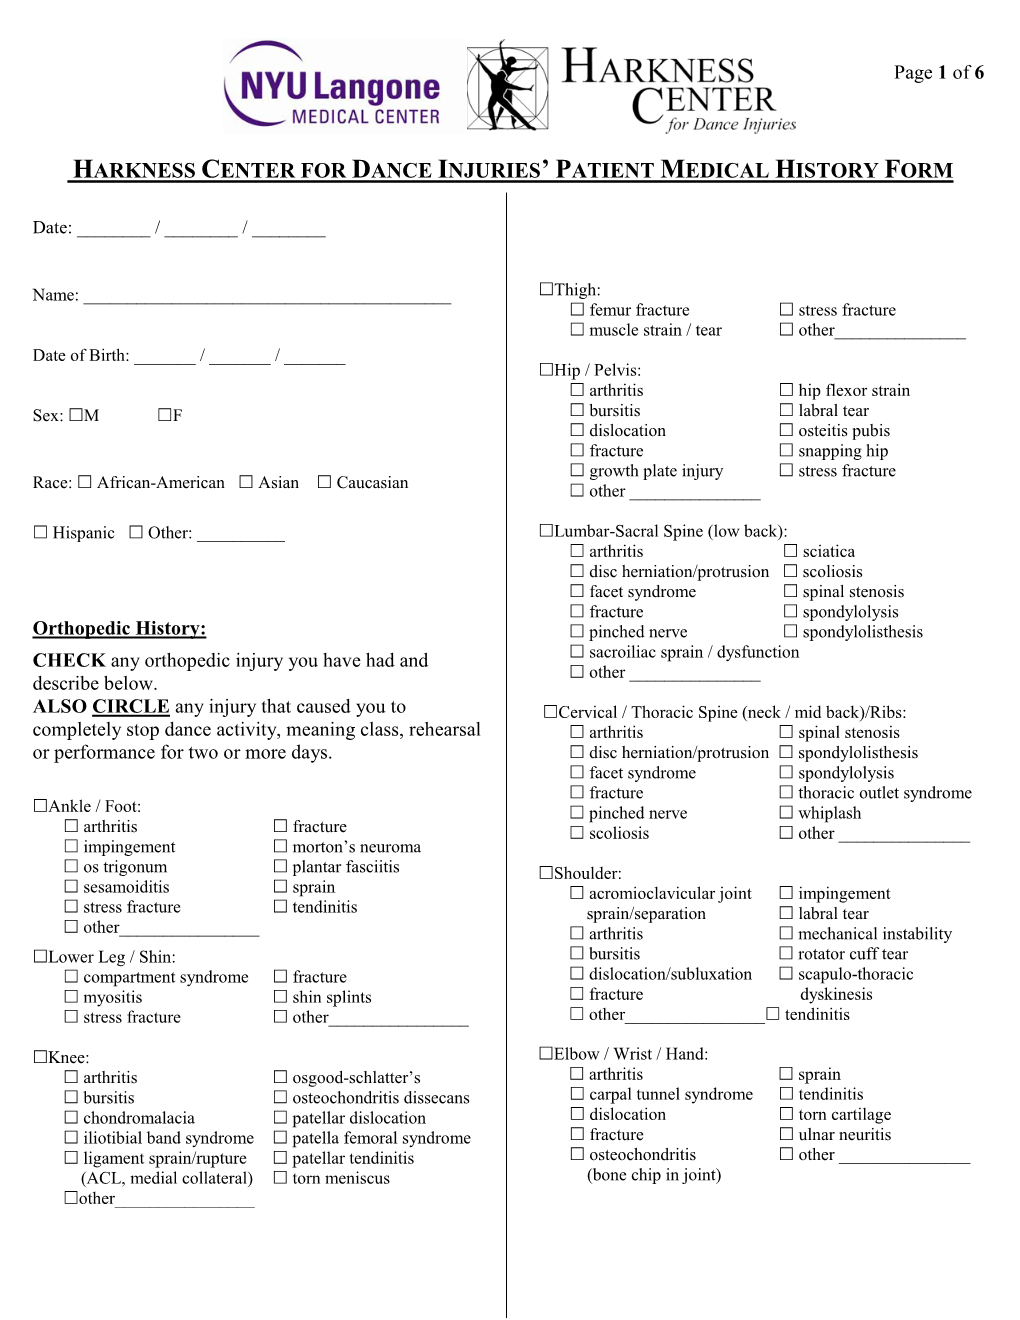 Harkness Center for Dance Injuries' Patient Medical History Form